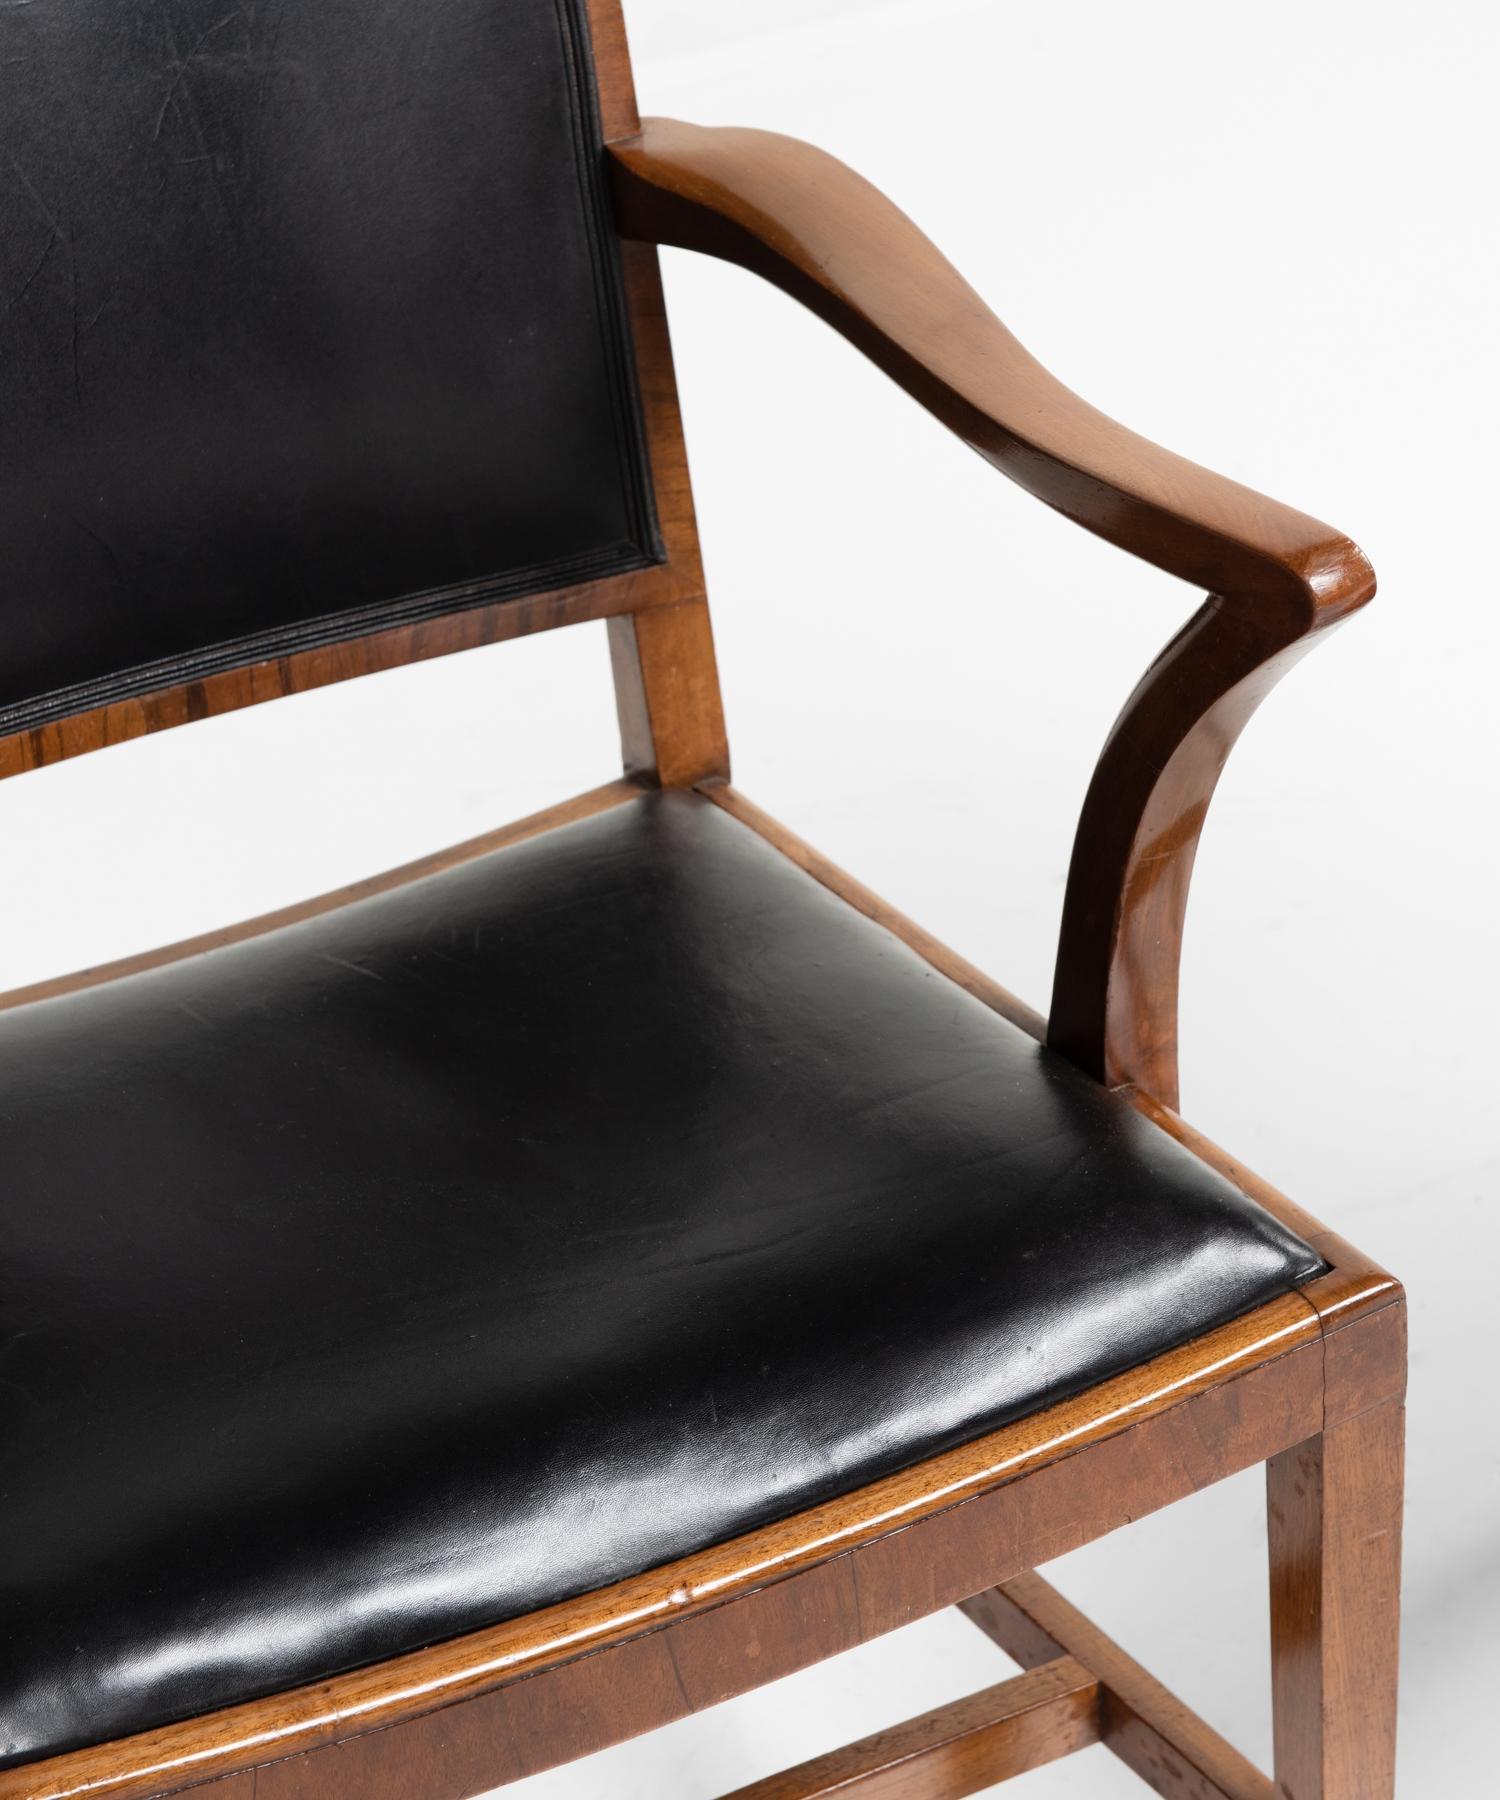 Early 20th Century Walnut and Leather Dining Chairs by Heals of London, England, circa 1915